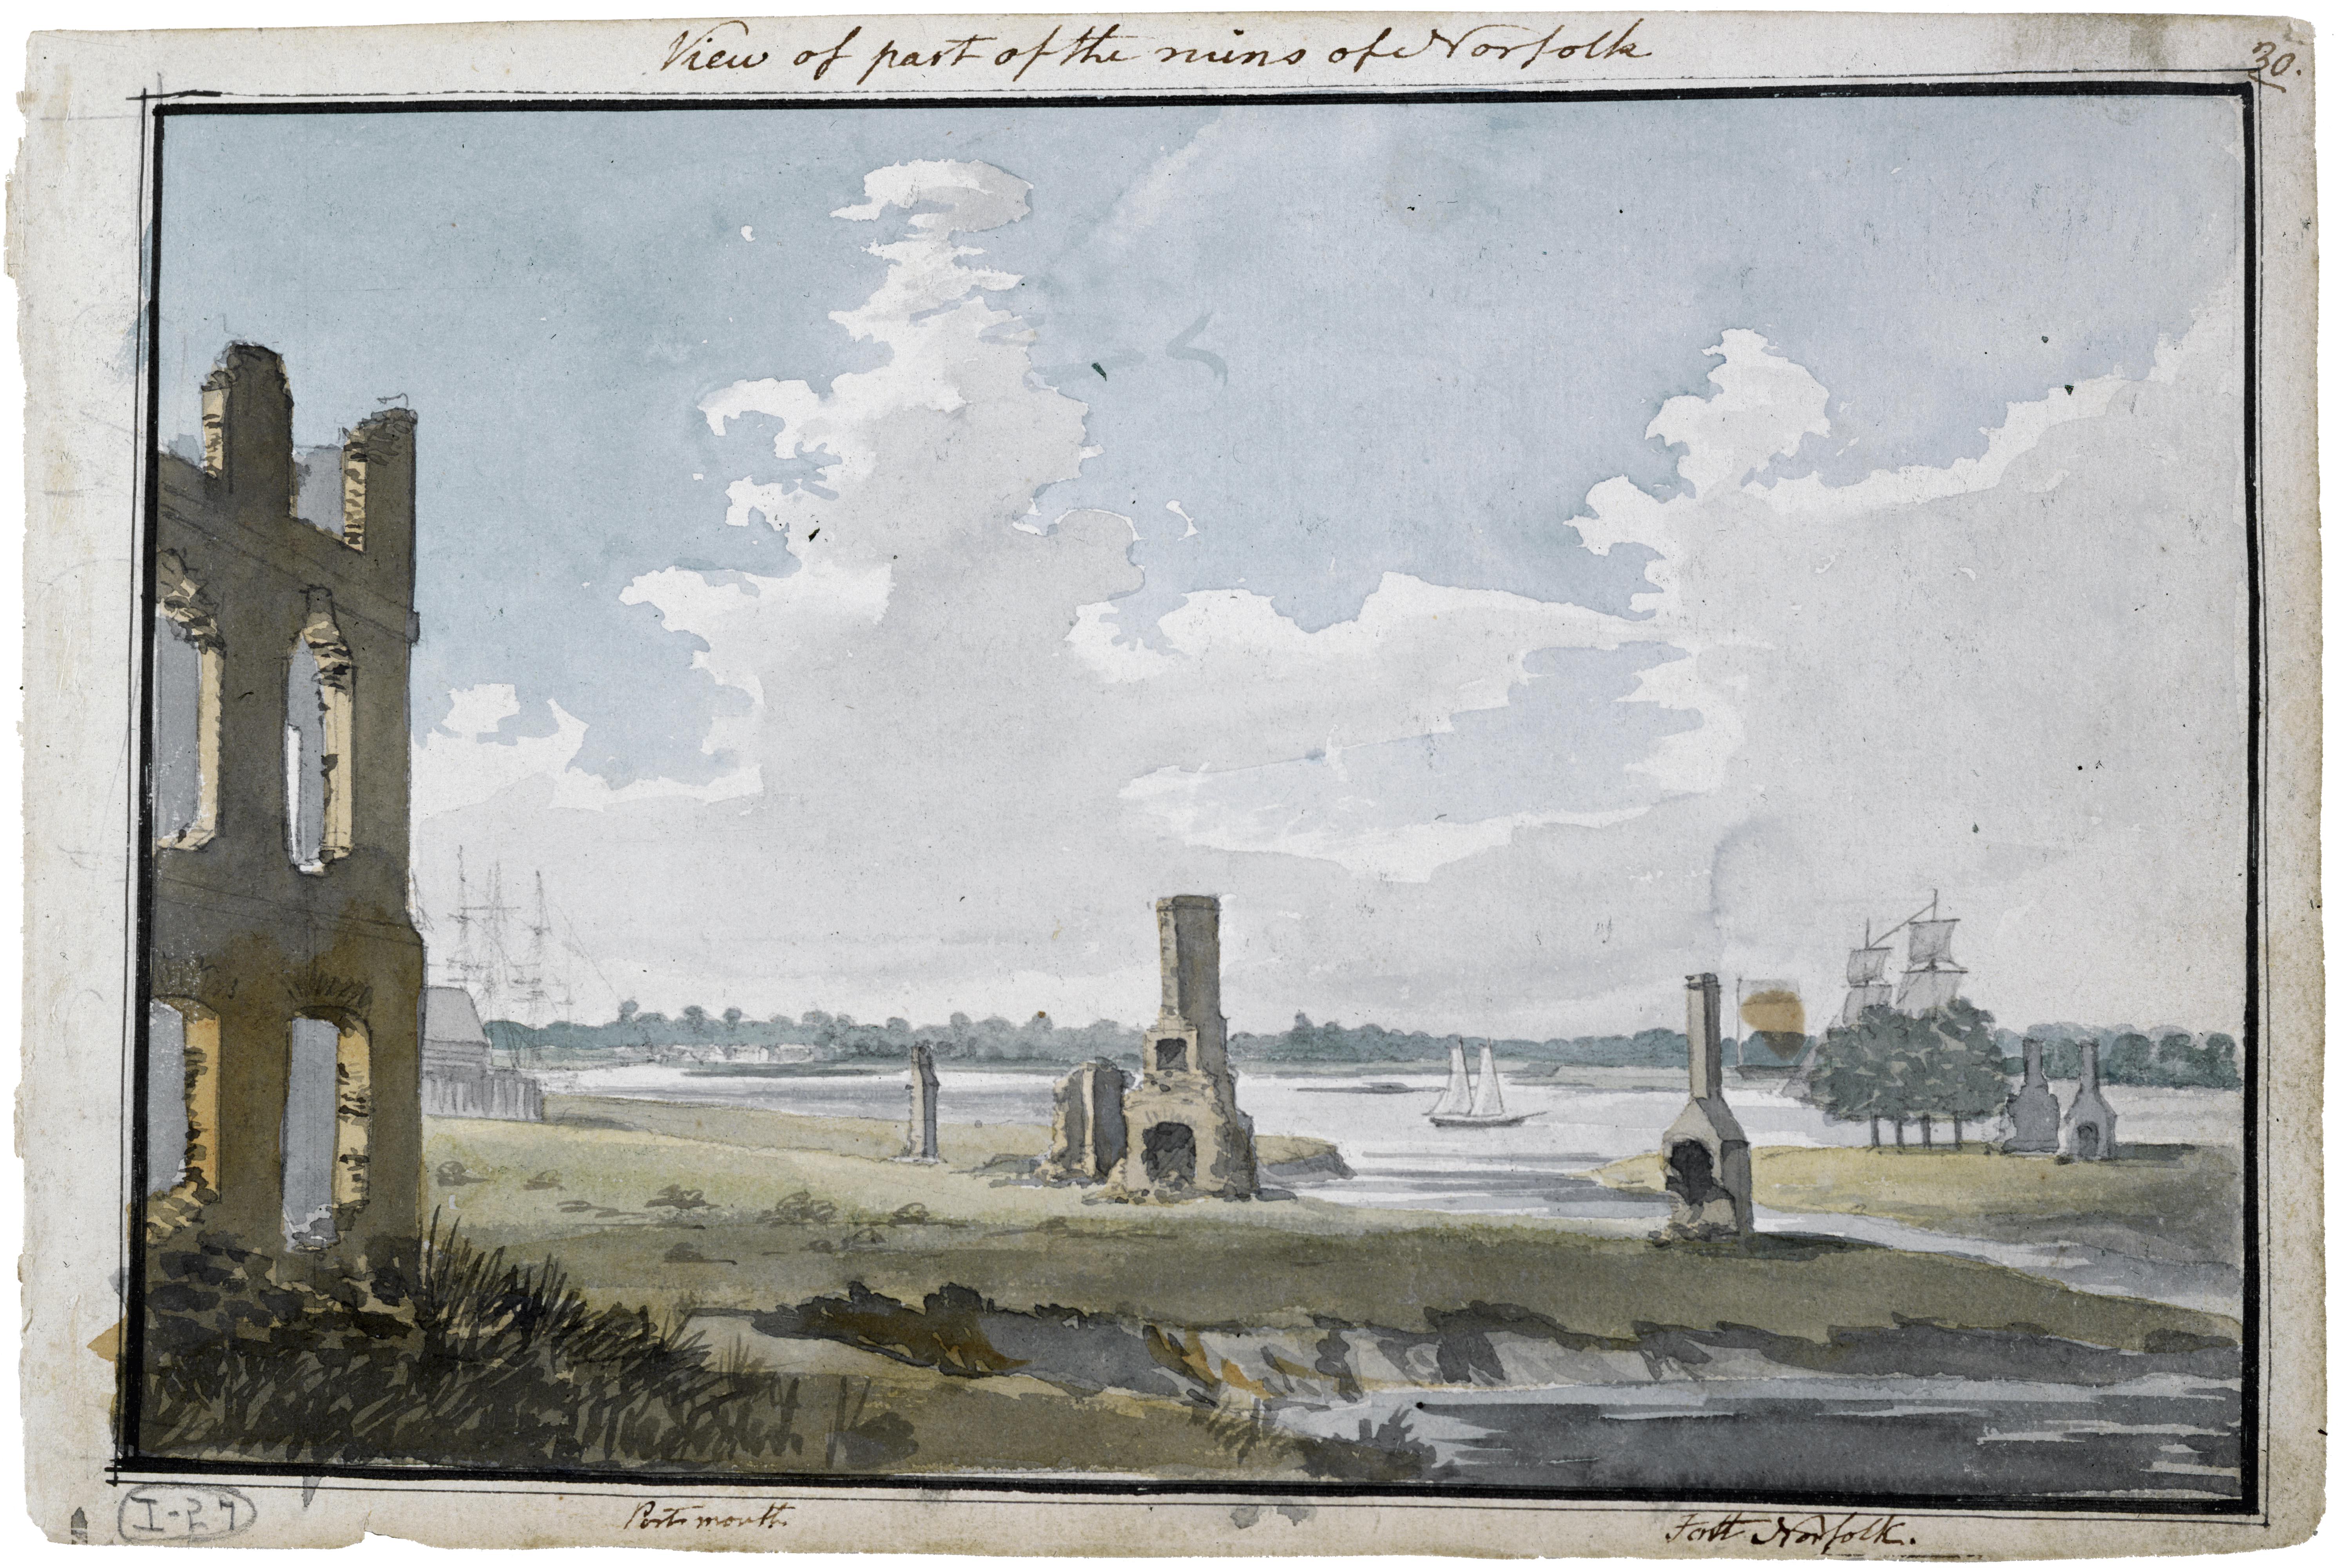 1796–98, watercolour, 17.7 × 26.6 cm. Collection of Maryland Historical Society (1960-108-1-1-27).